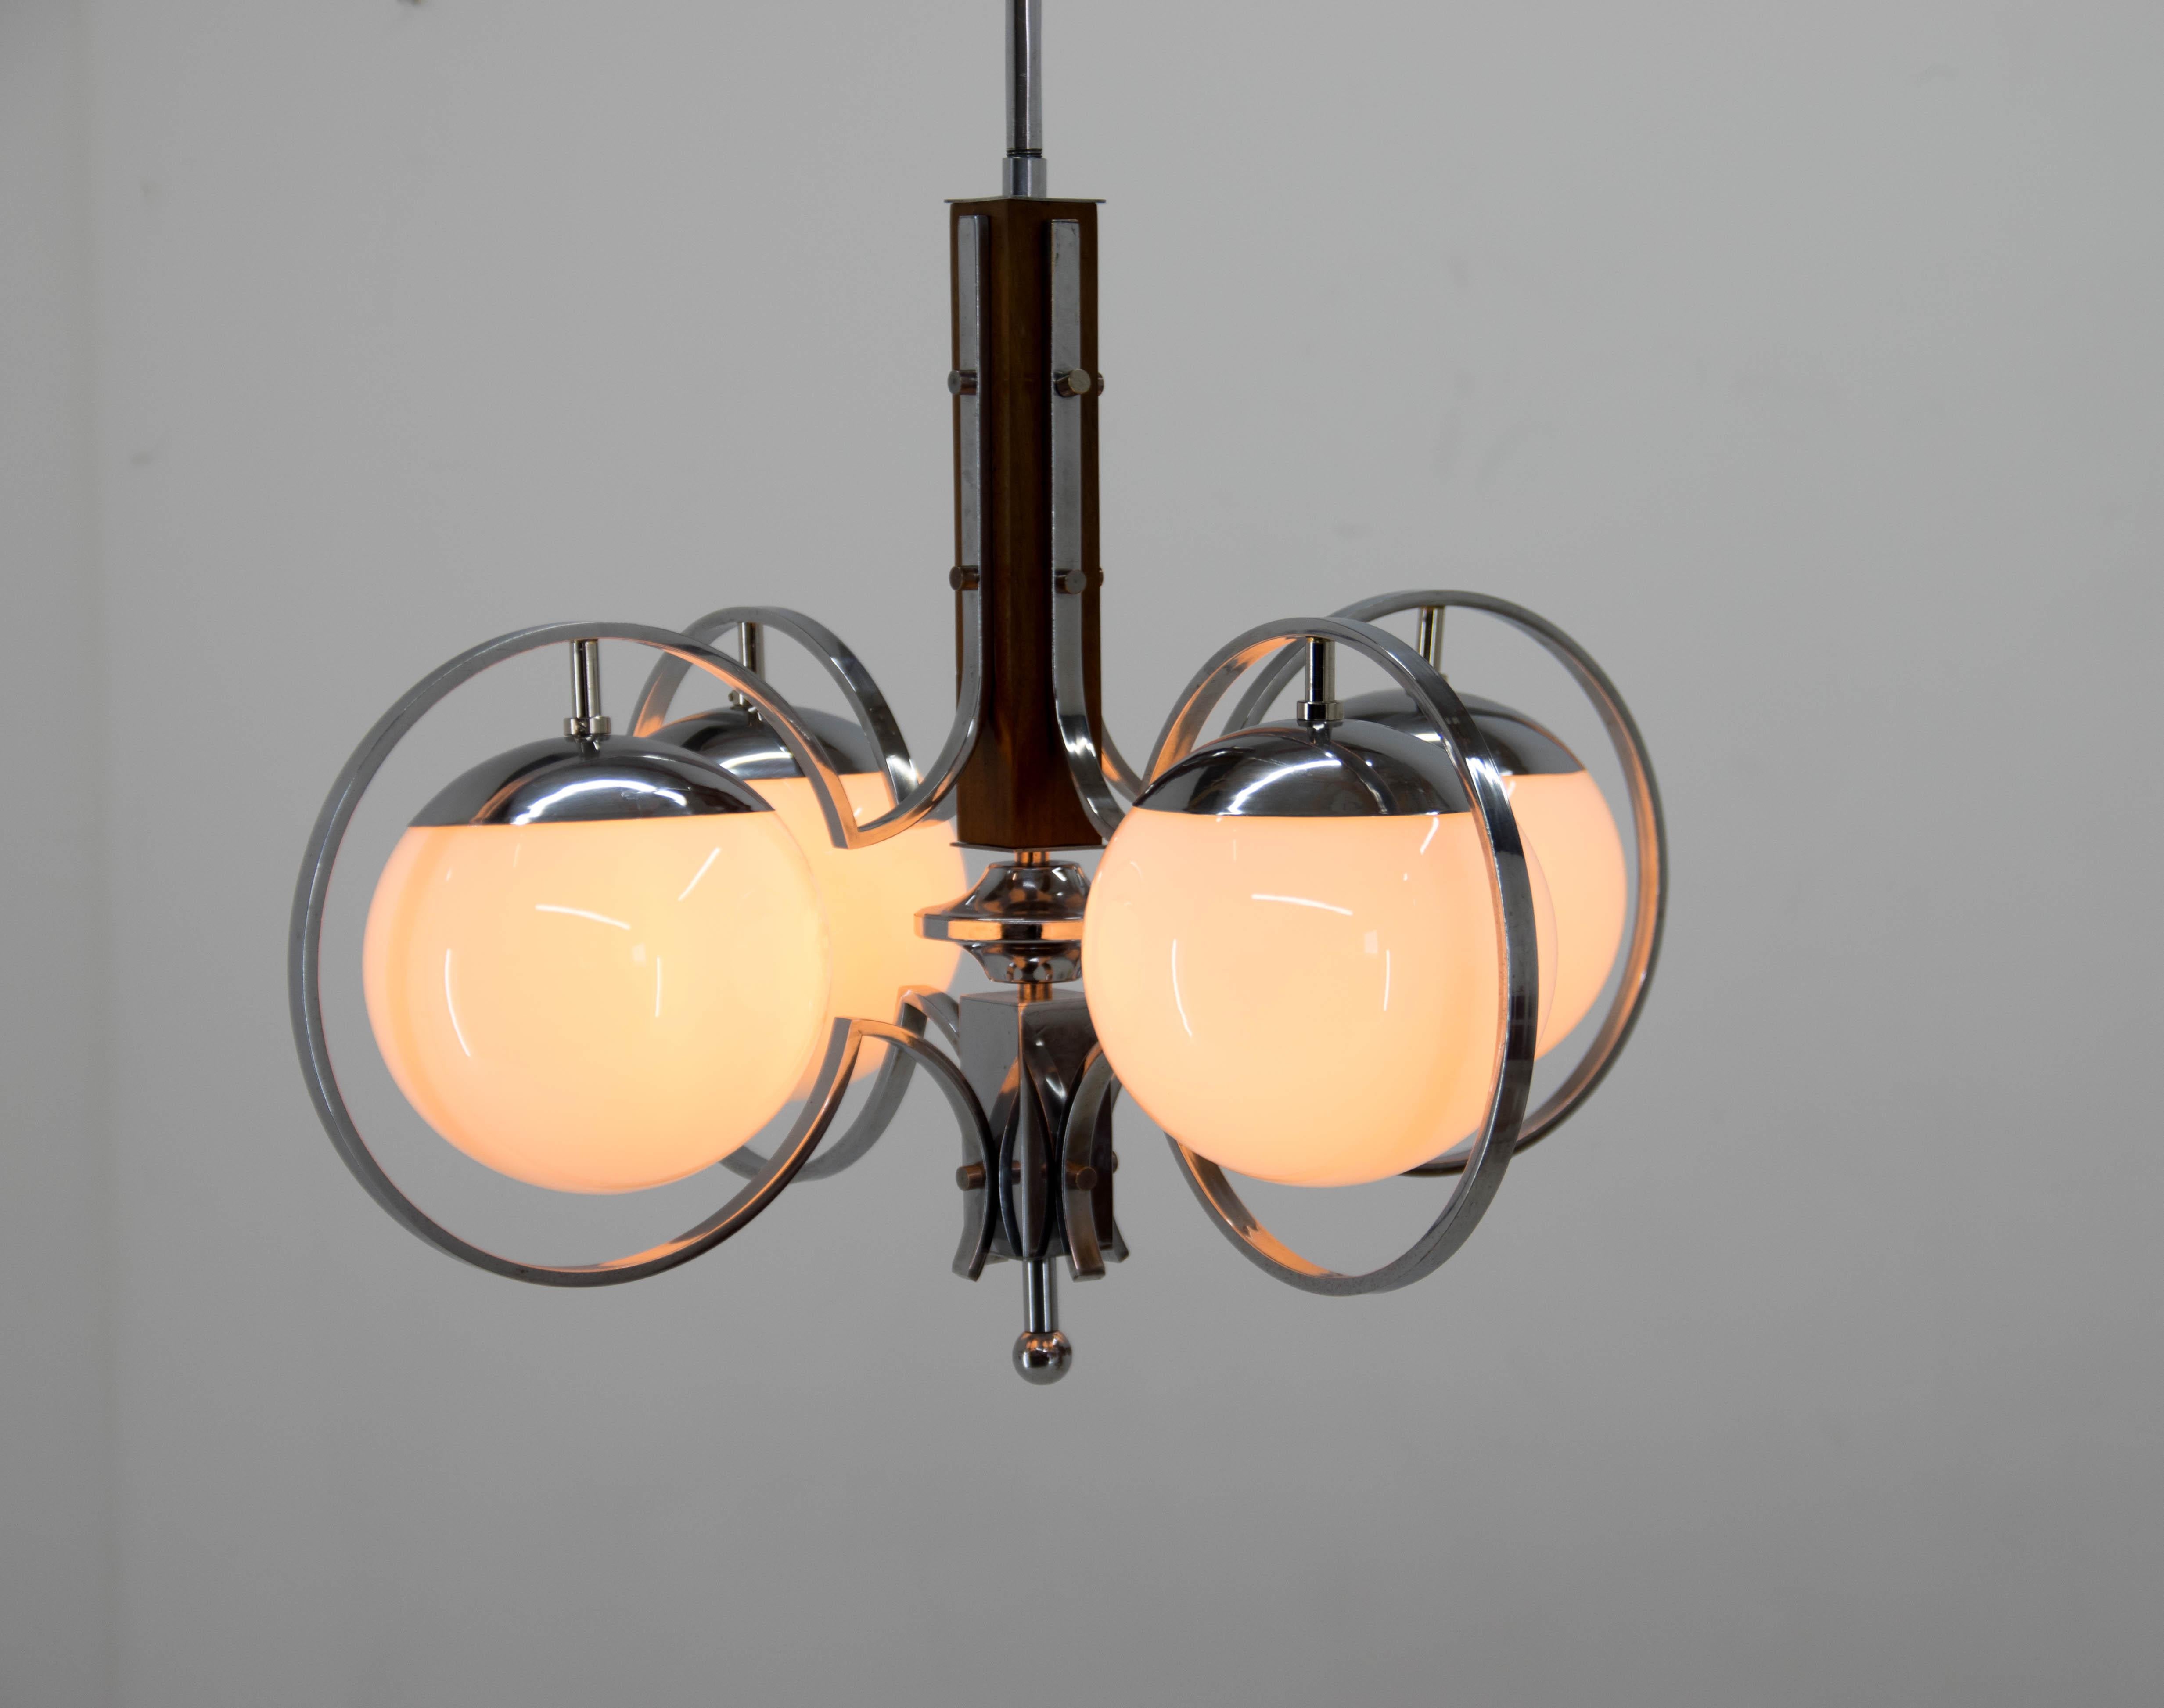 4-flamming Art Deco chandelier made of wood, chrome and glass.
Completely restored: polished, rewired: 4x40W, E25-E27 bulbs
Glass in perfect condition
Central rod can be shortened on demand.
US wiring compatible.